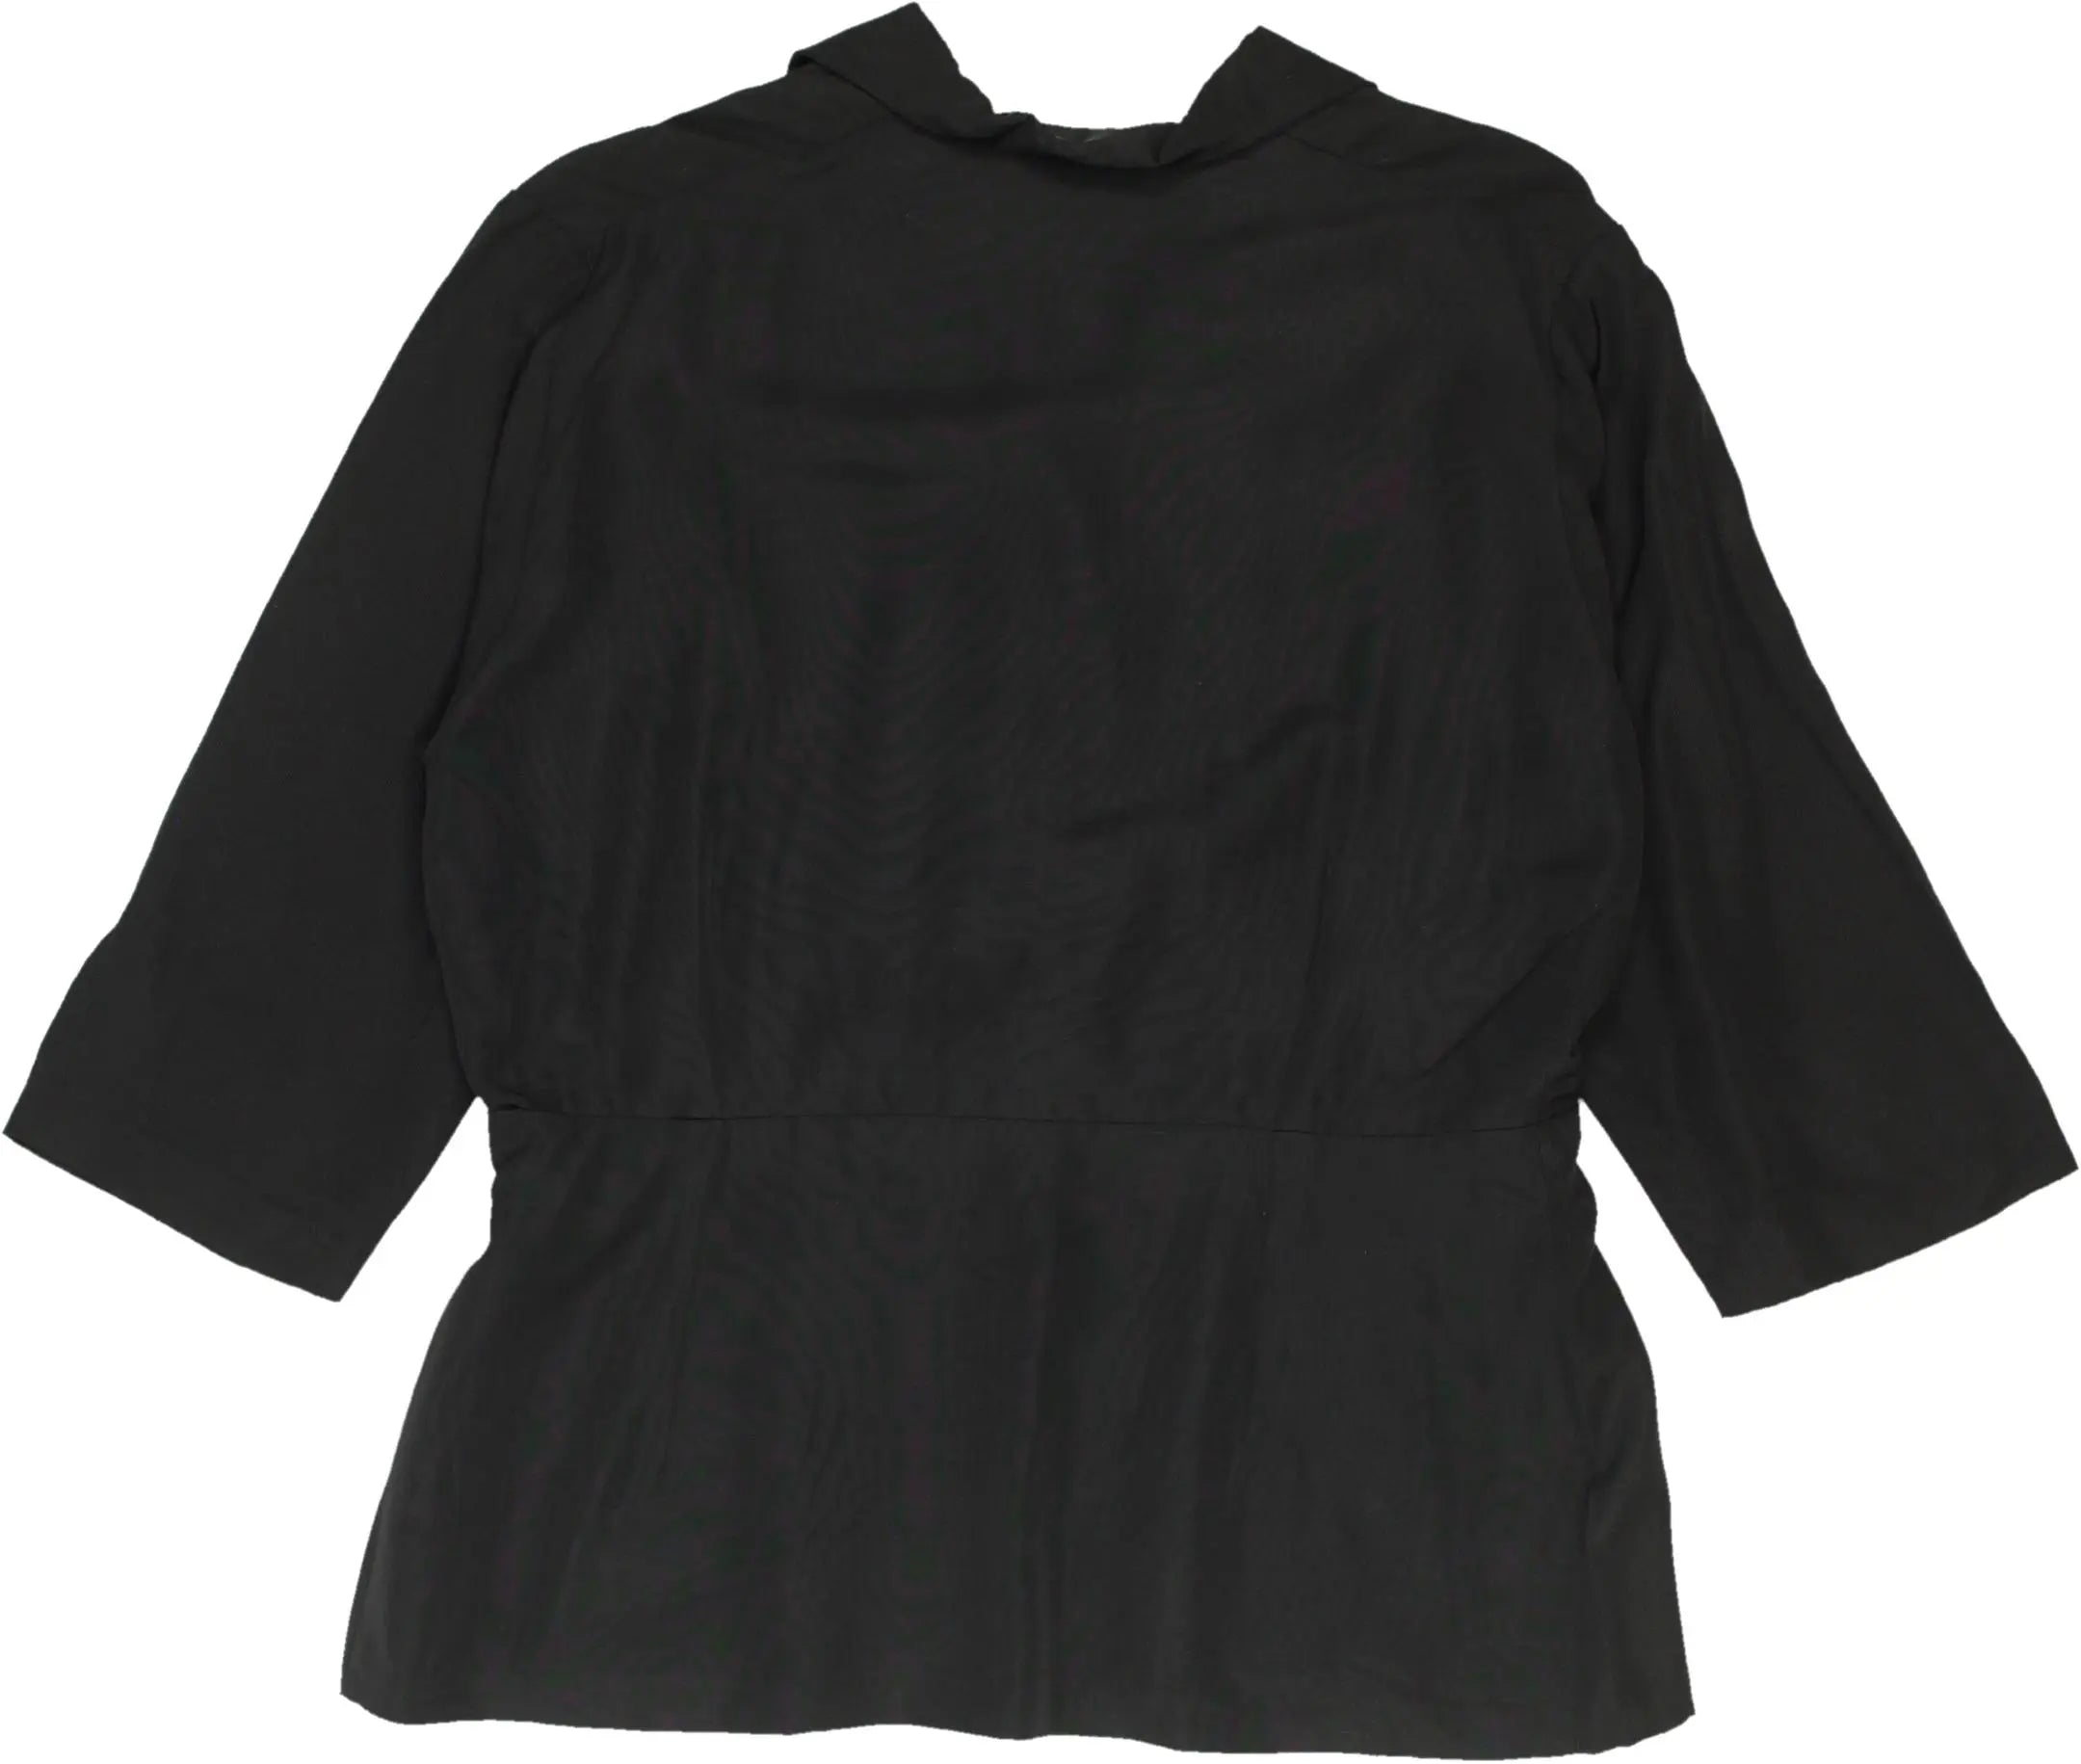 Handmade - Handmade Black Blouse- ThriftTale.com - Vintage and second handclothing